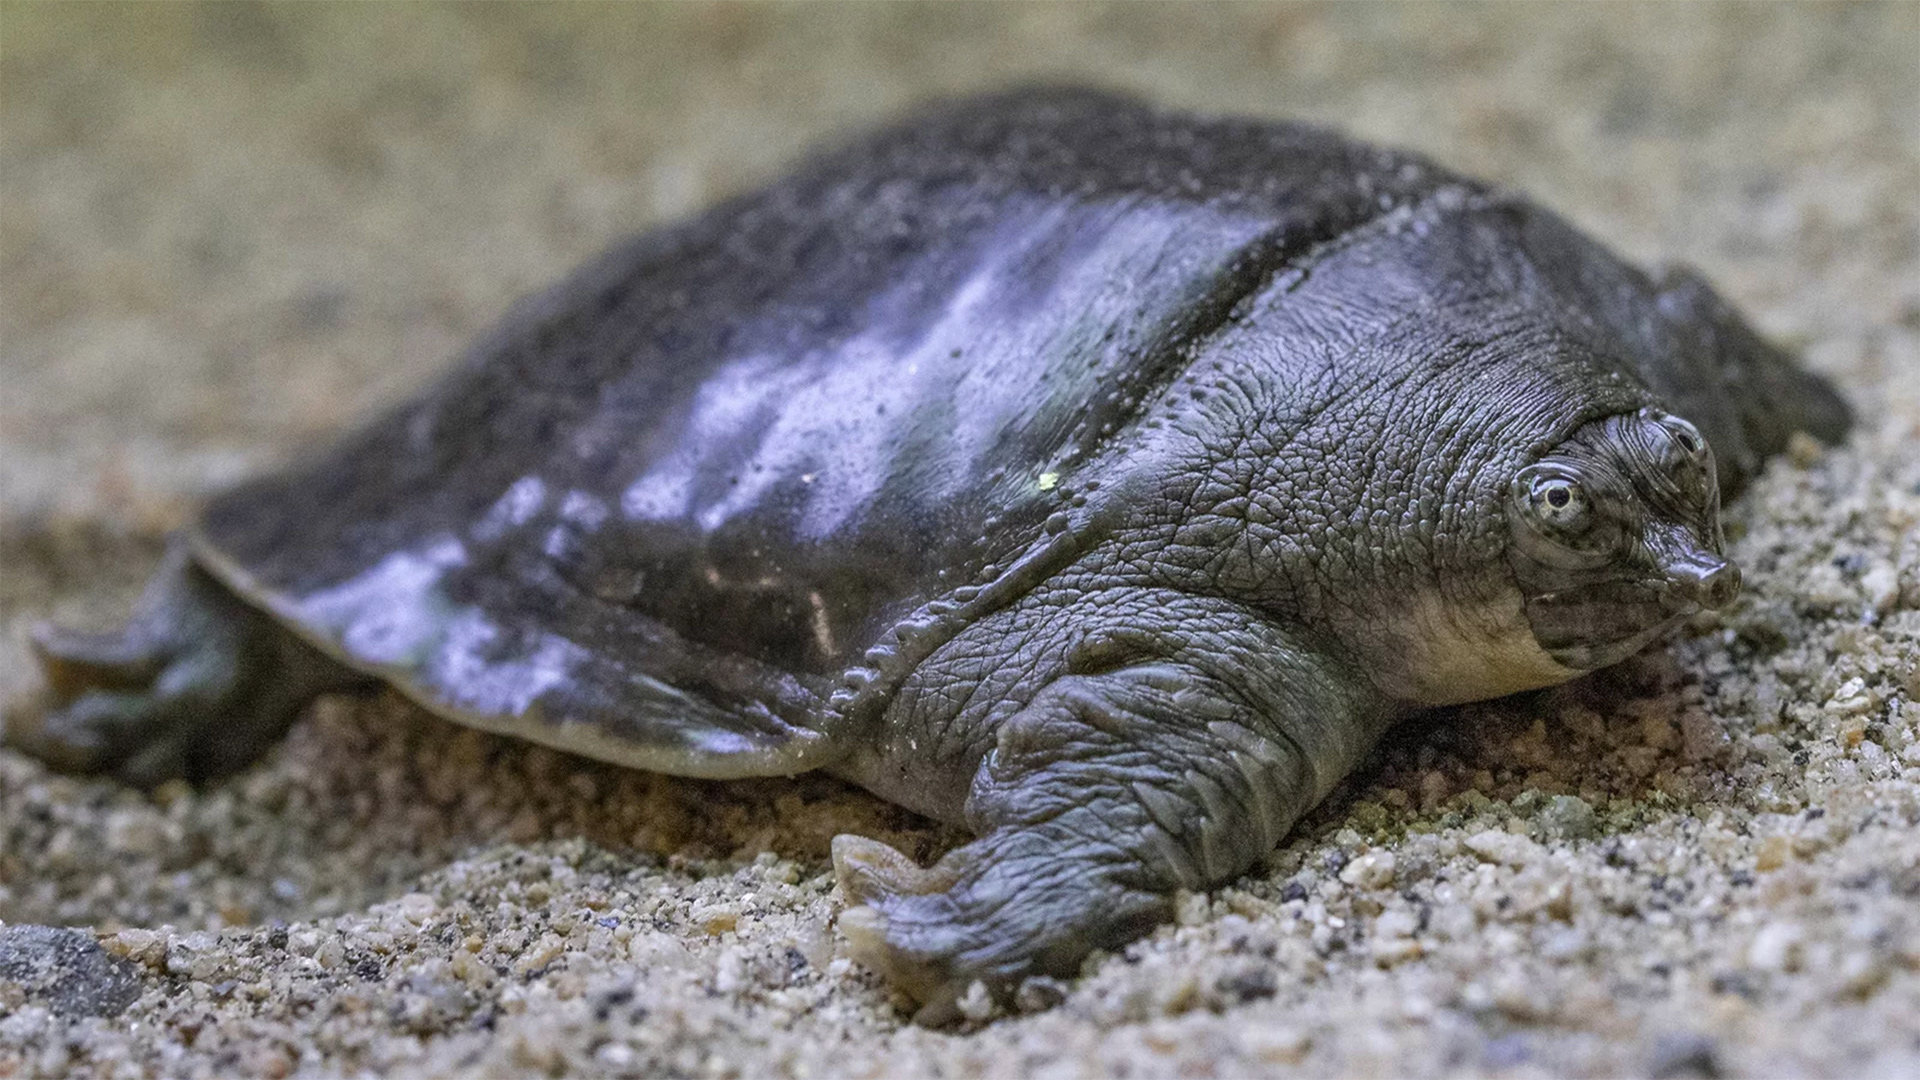 After years of waiting, rare turtles have bred 41 hatchlings at the San Diego Zoo